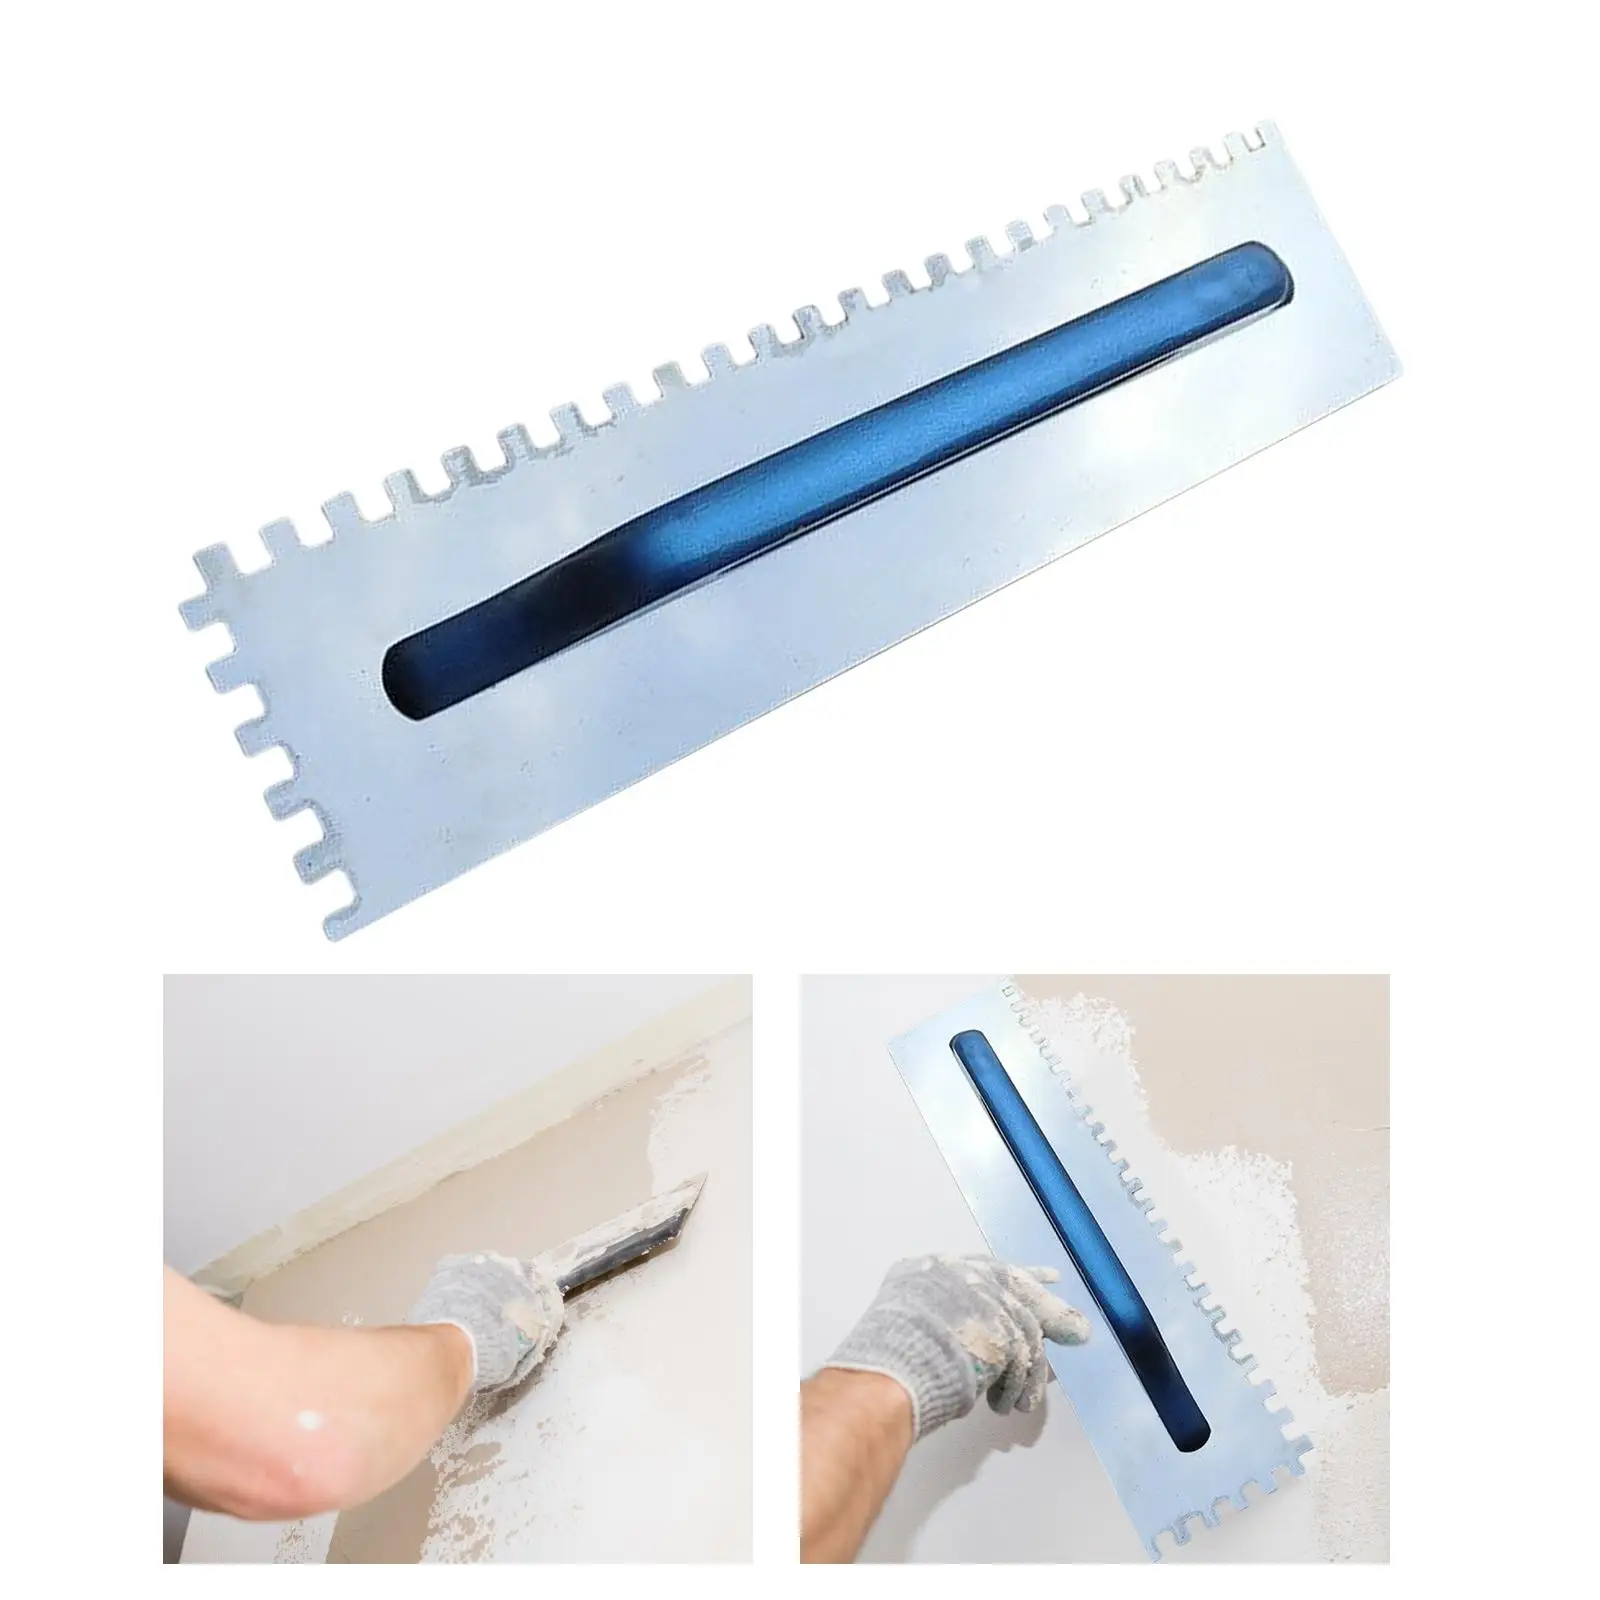 Drywall Smoothing Tool Wall Plastering Skimming Portable Concrete Scraping Tool Plaster Trowel Flooring Grout Float Tiling Tool